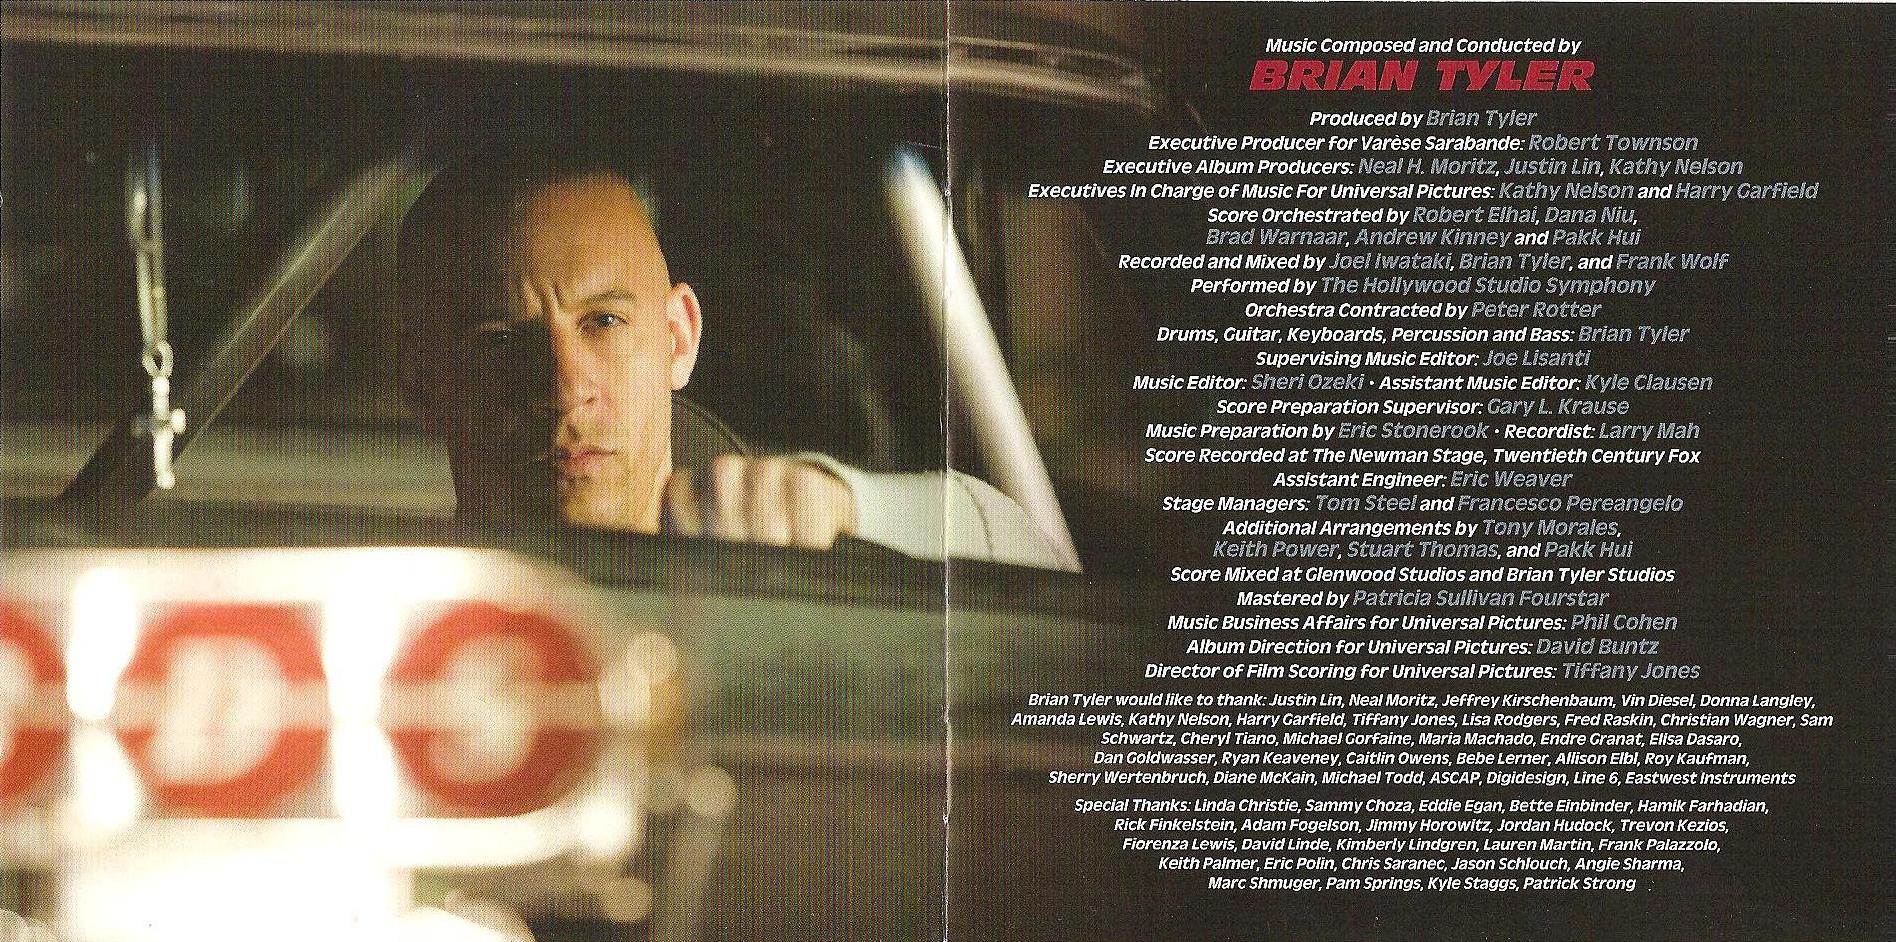 OST Форсаж 4. Форсаж 4 OST FLAC. The Transporter 2002 Original Motion picture score. Fast x Soundtrack _ move - Brian Tyler _ Original Motion picture score _. Soundtrack fast